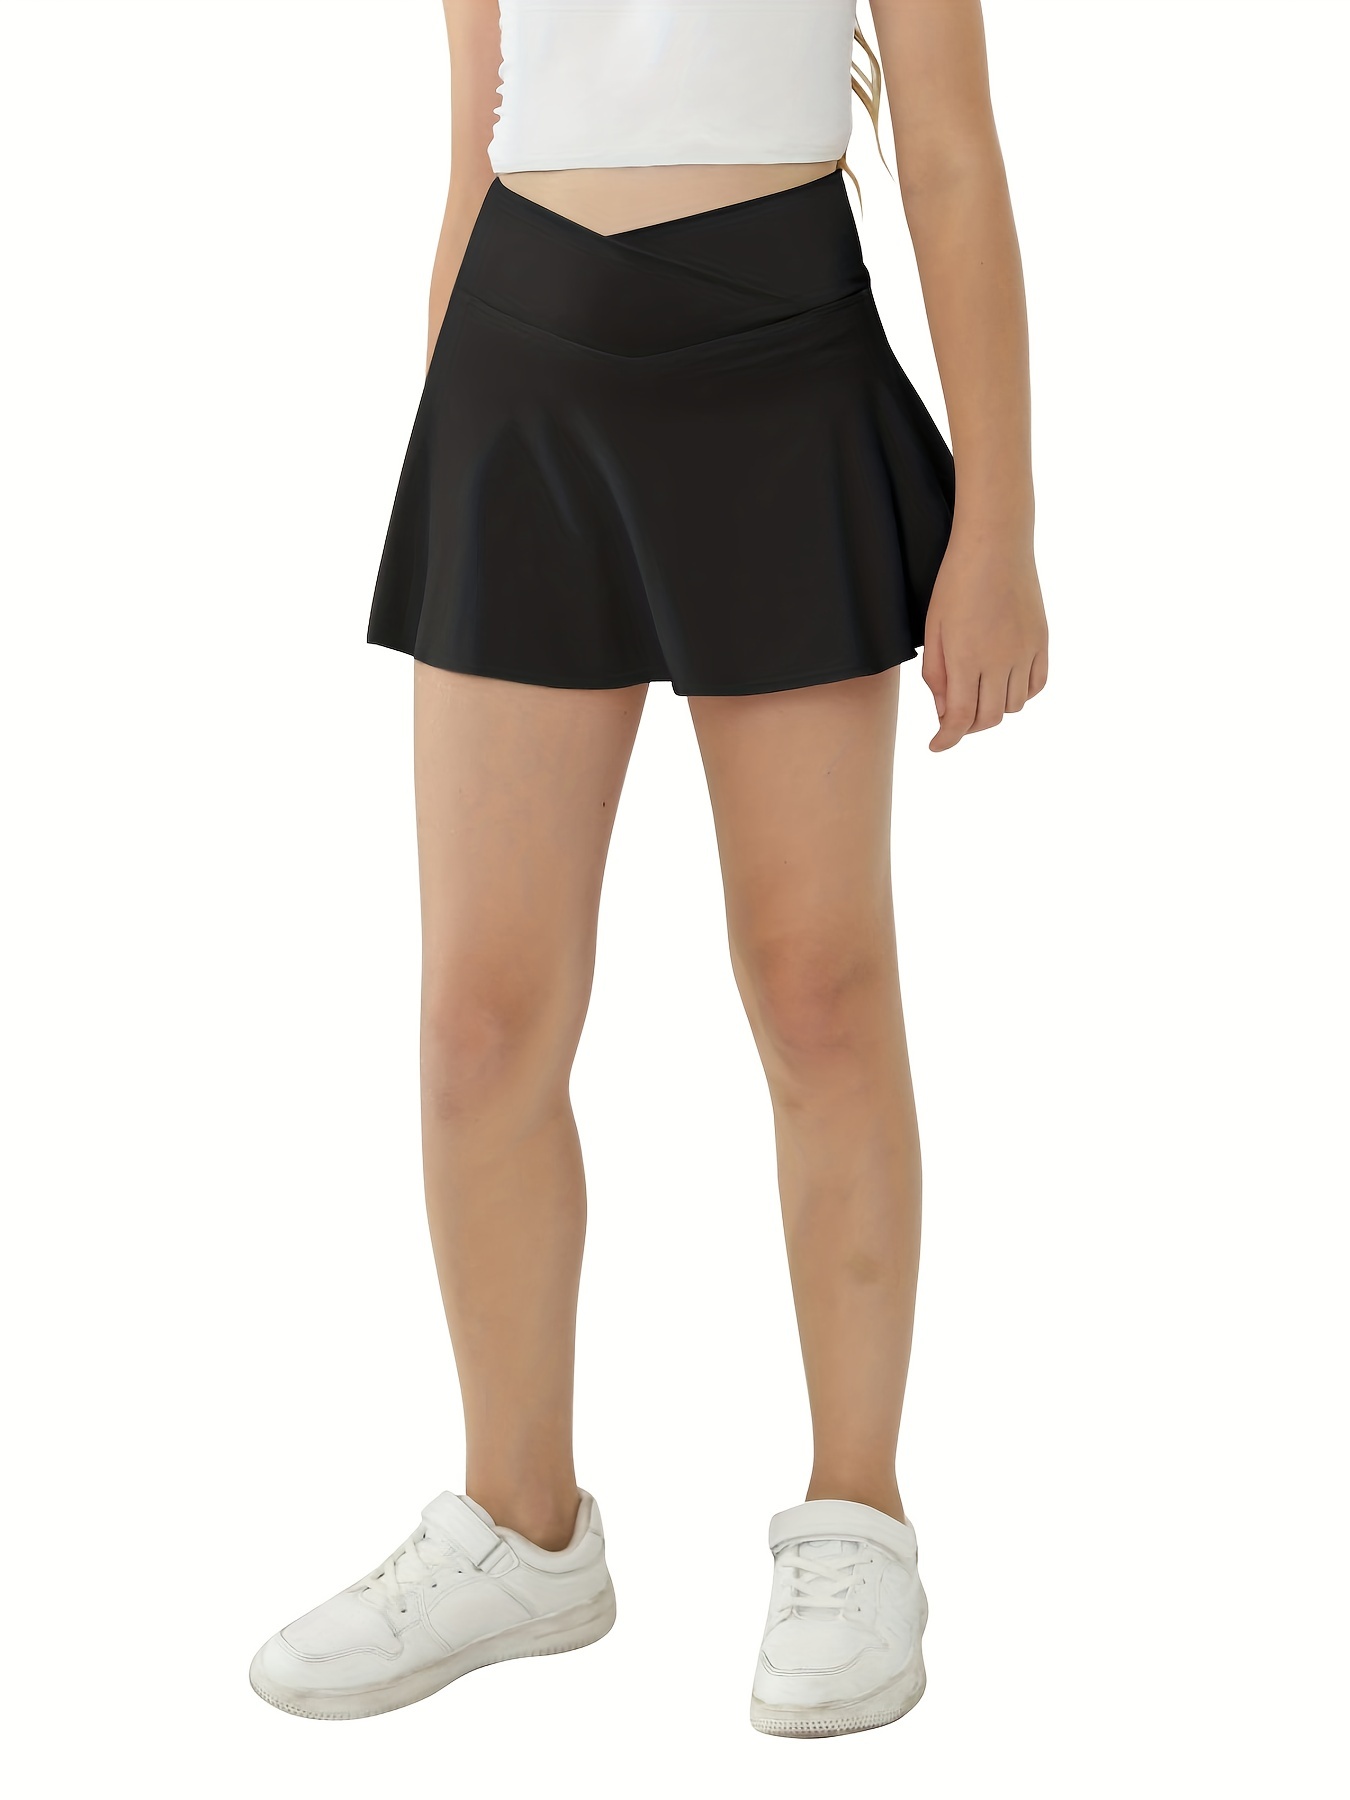 TZLDN Women's Tennis Skirt with Shorts Pockets High Waisted Crossover  Pleated Workout Athletic Golf Skorts Skirts